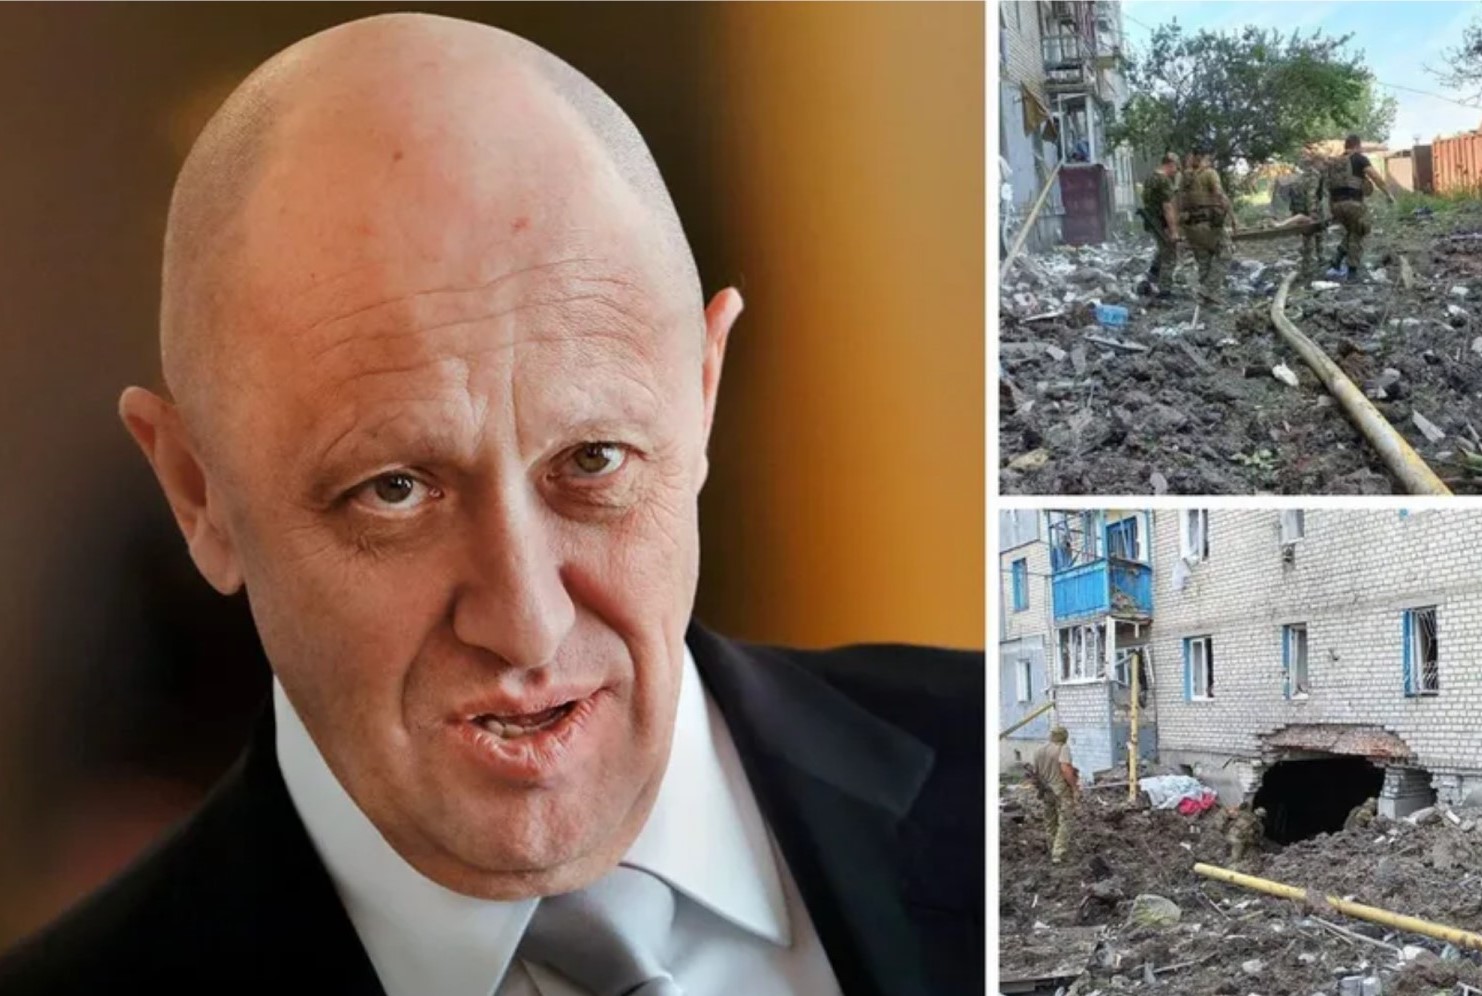 Yevgeny Prigozhin and the devastation his paid Wagner unit killers have brought to Ukraine Photo collage from StopKor